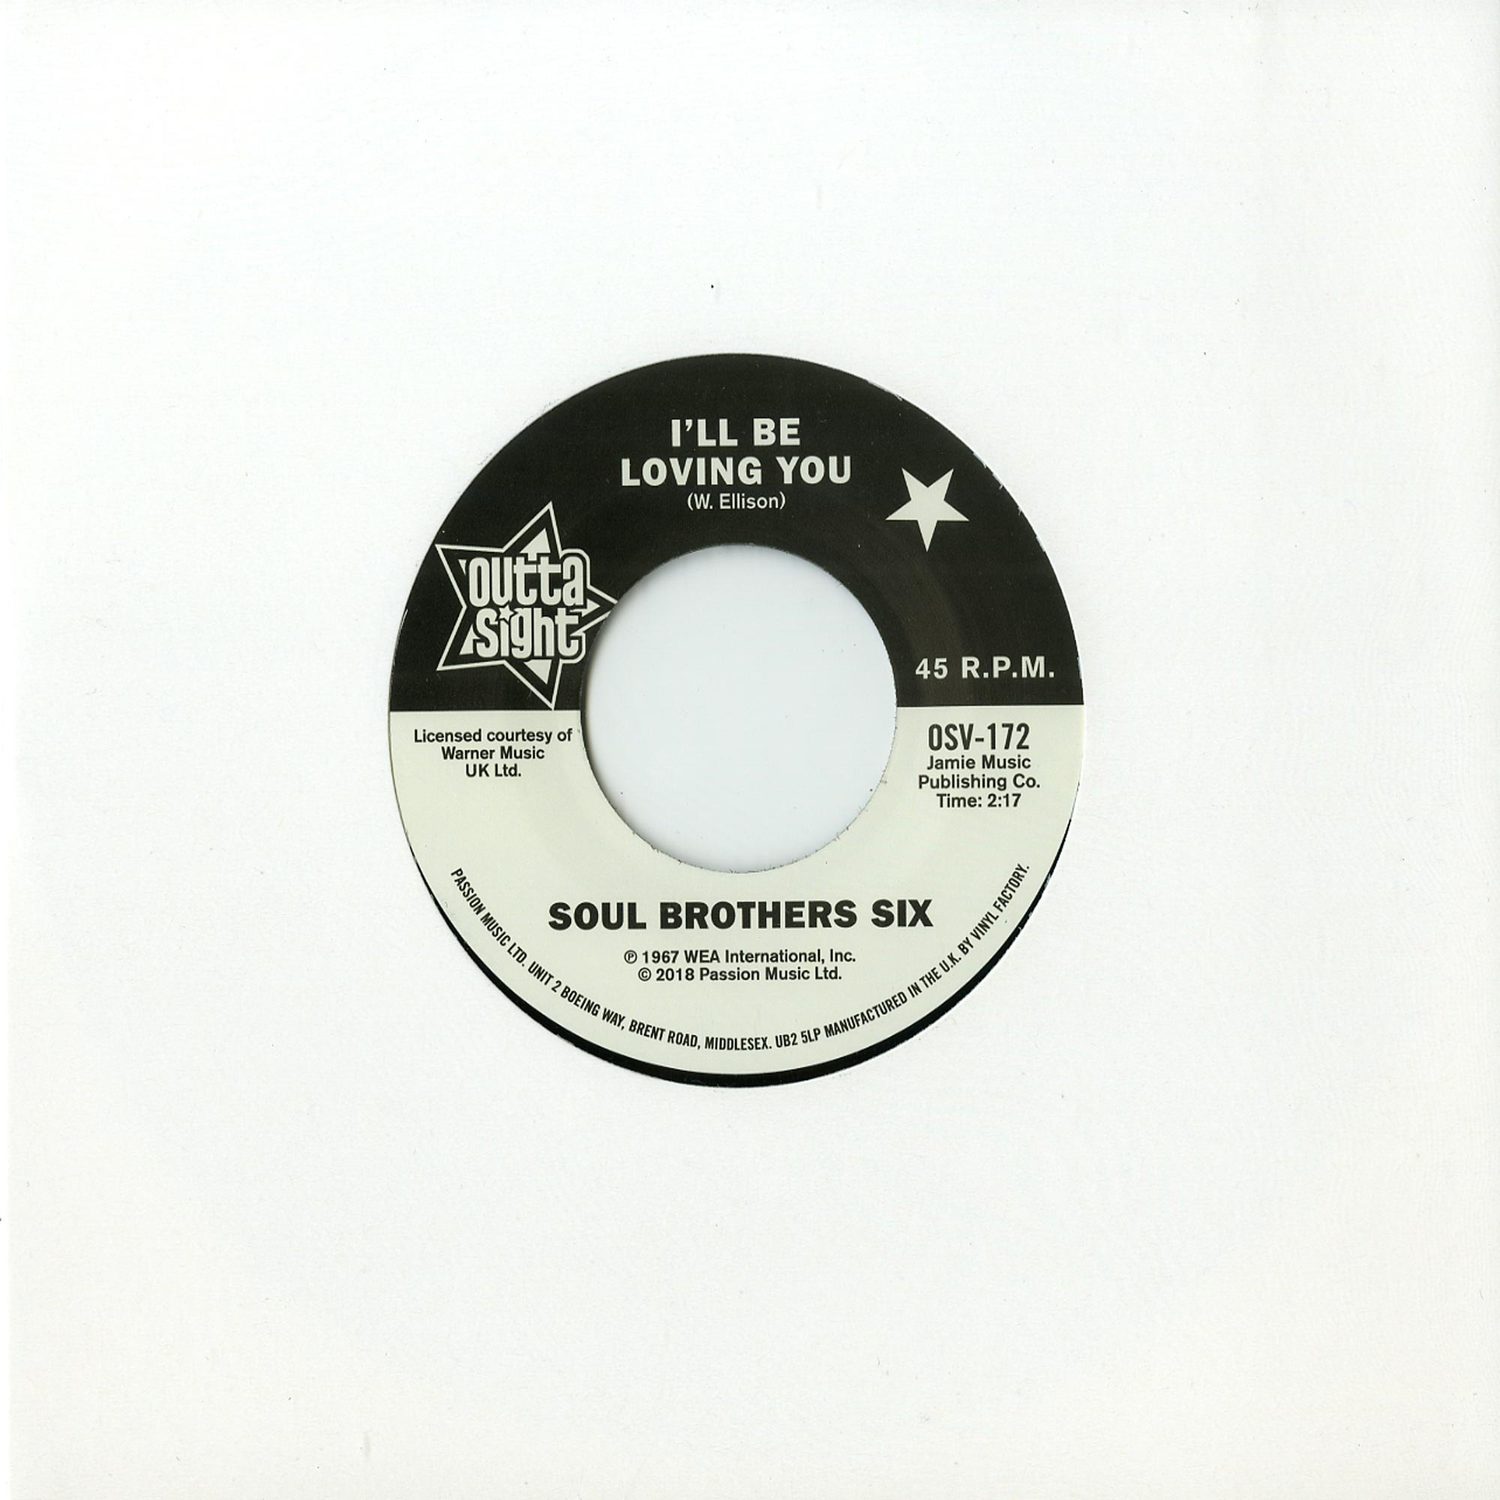 The Soul Brothers Six / Willie Tee - I LL BE LOVING YOU / WALKING UP A ONE WAY STREET 